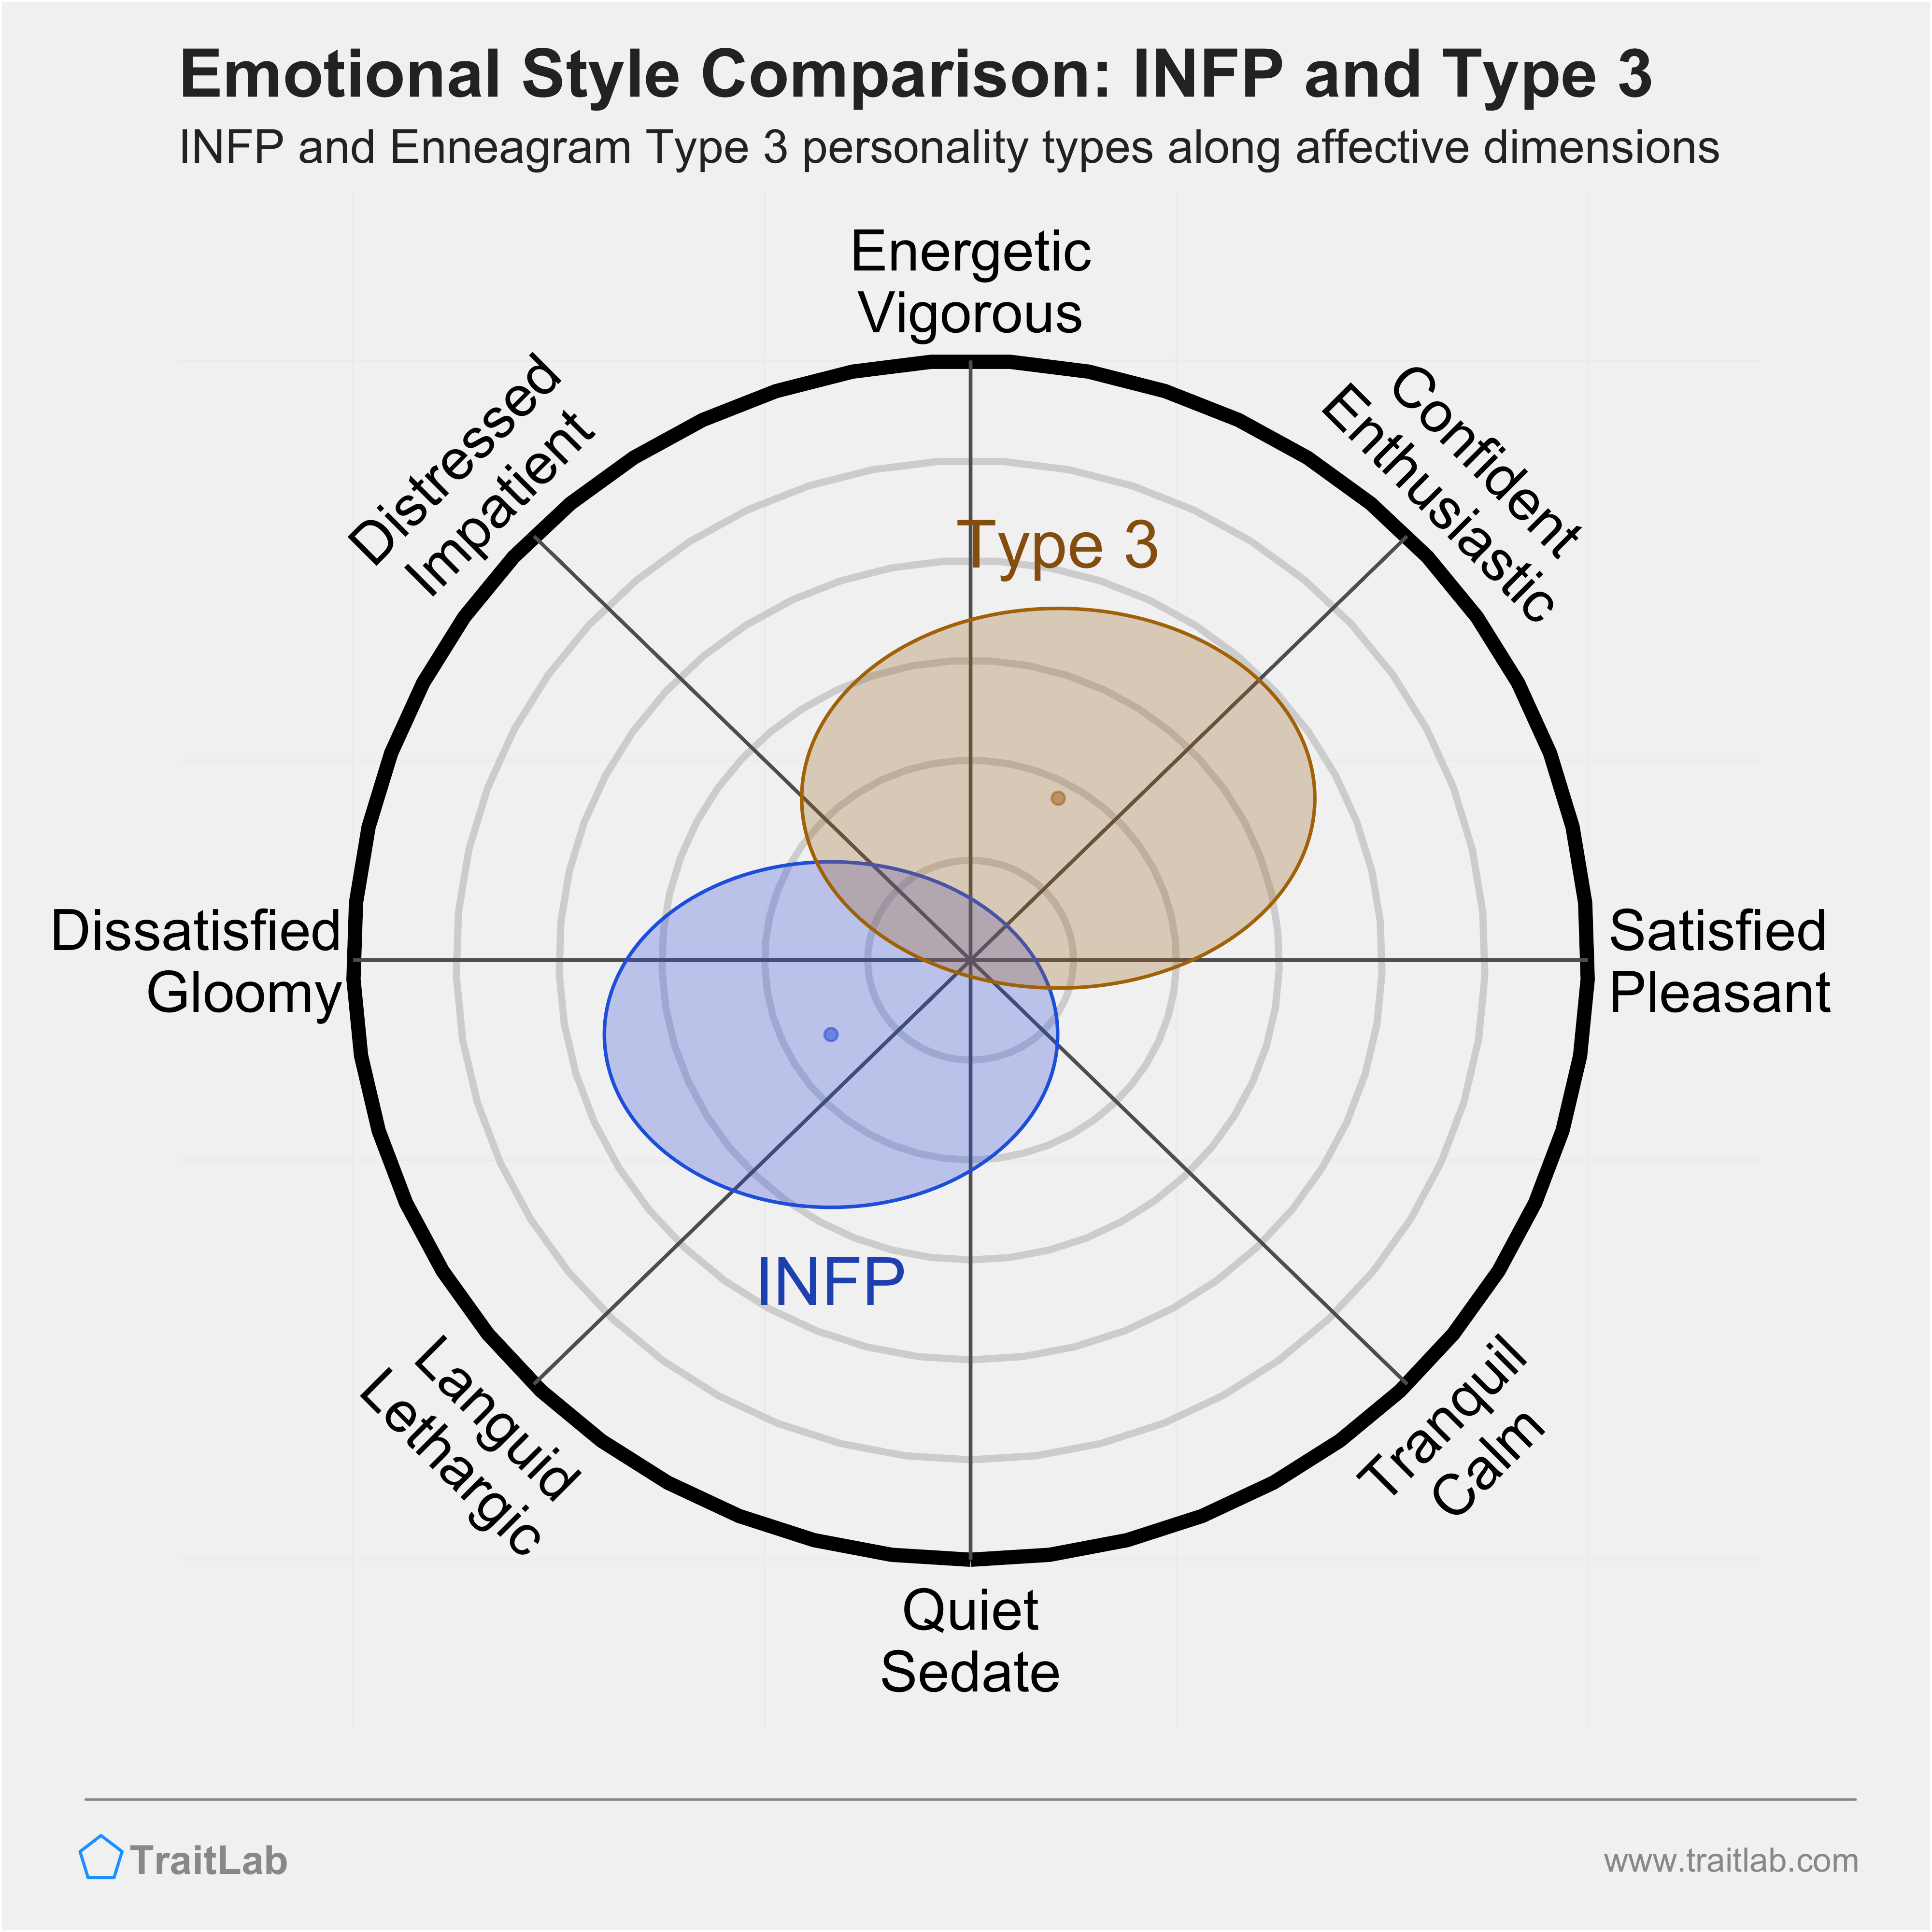 INFP and Type 3 comparison across emotional (affective) dimensions